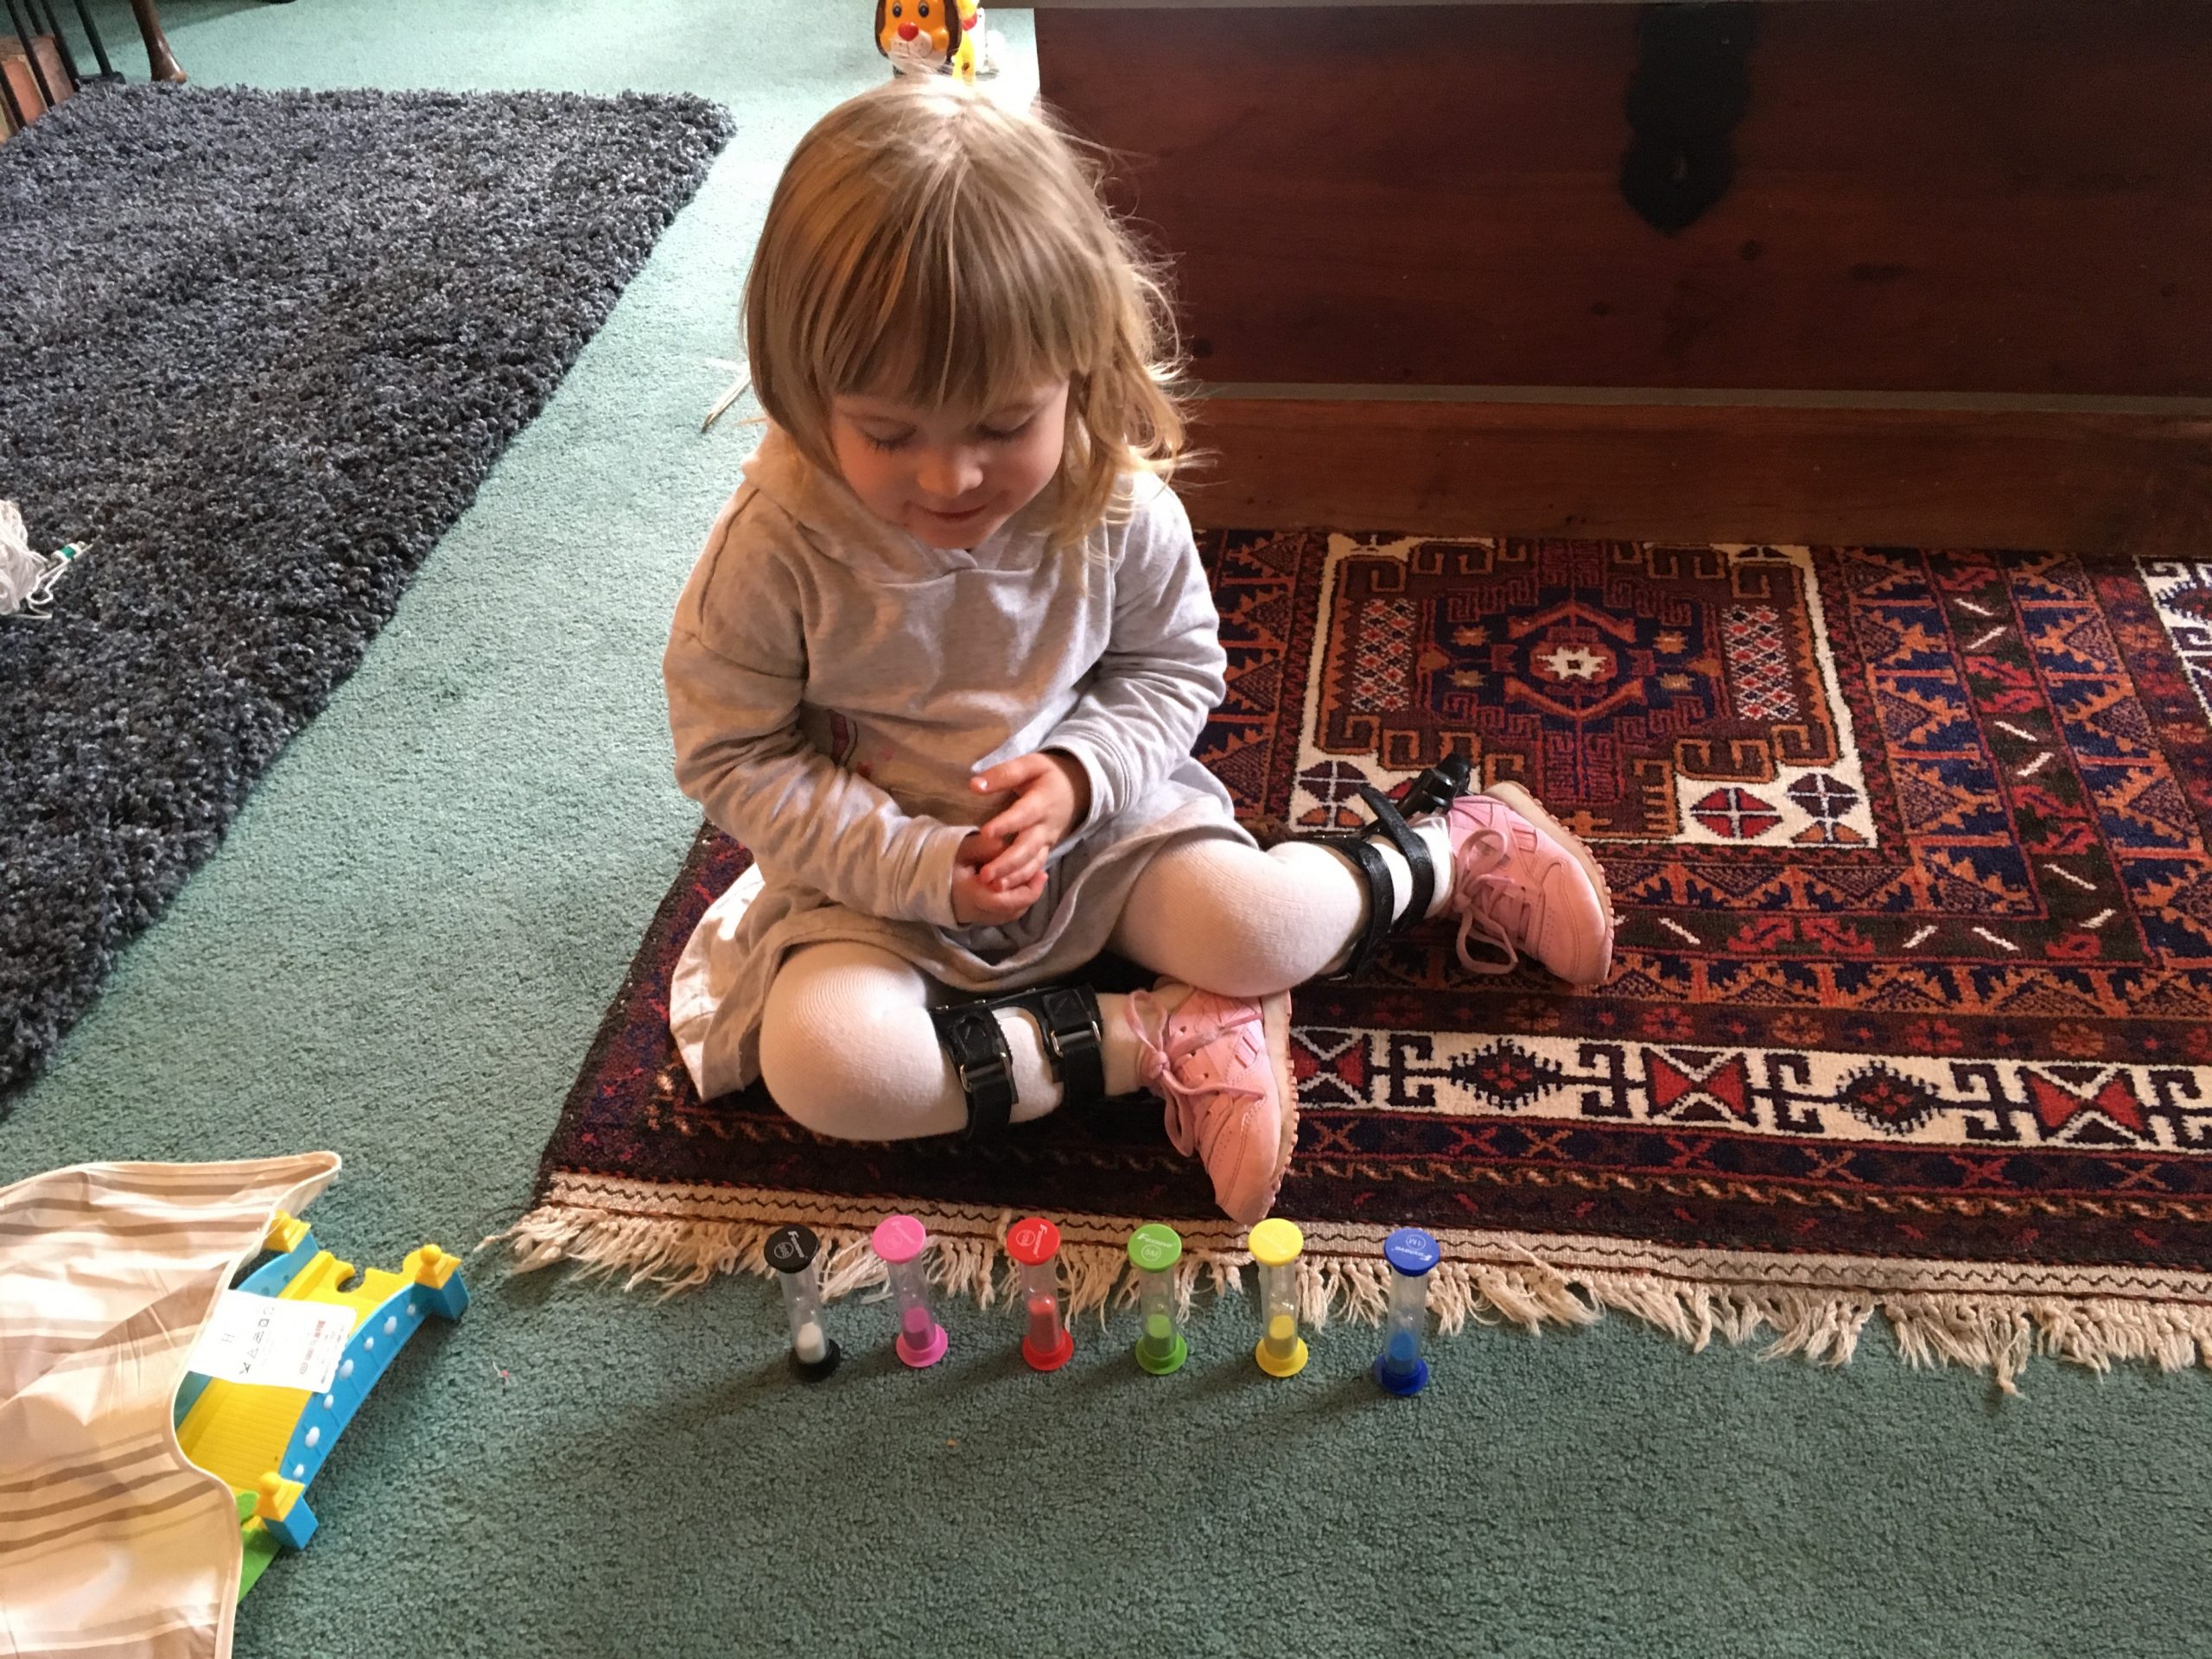 A young girl with club foot sits on a patterned carpet, playing with some colourful egg timers.